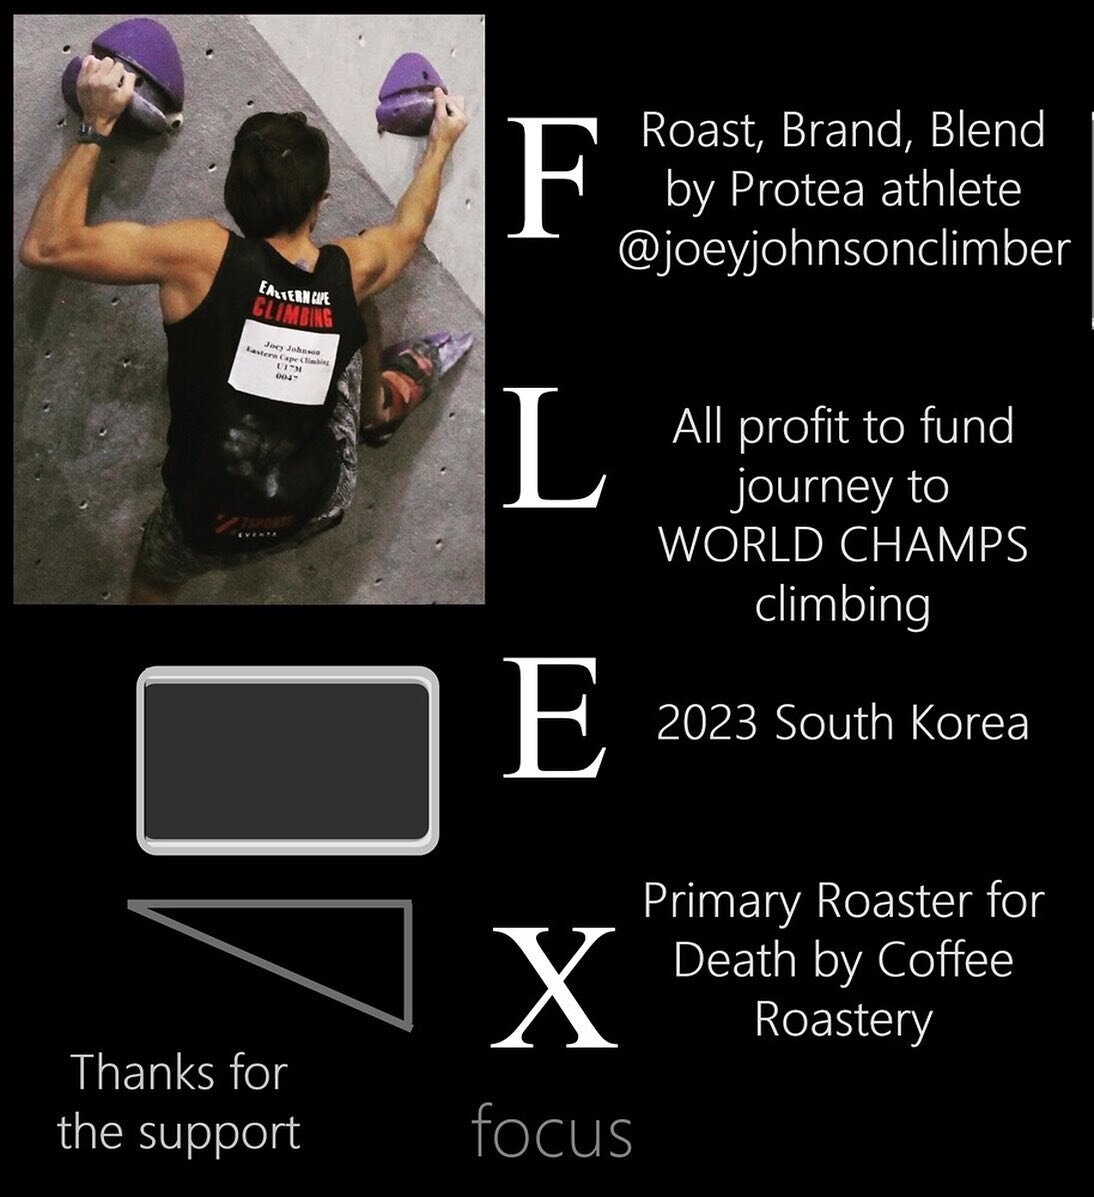 FLEX
Focus 
Coffee launched. 

Sports brand. 

Follow @joeyjohnsonclimber 

Bags in store and on website for free courier accross SA 

#flex #coffee #sport #athlete